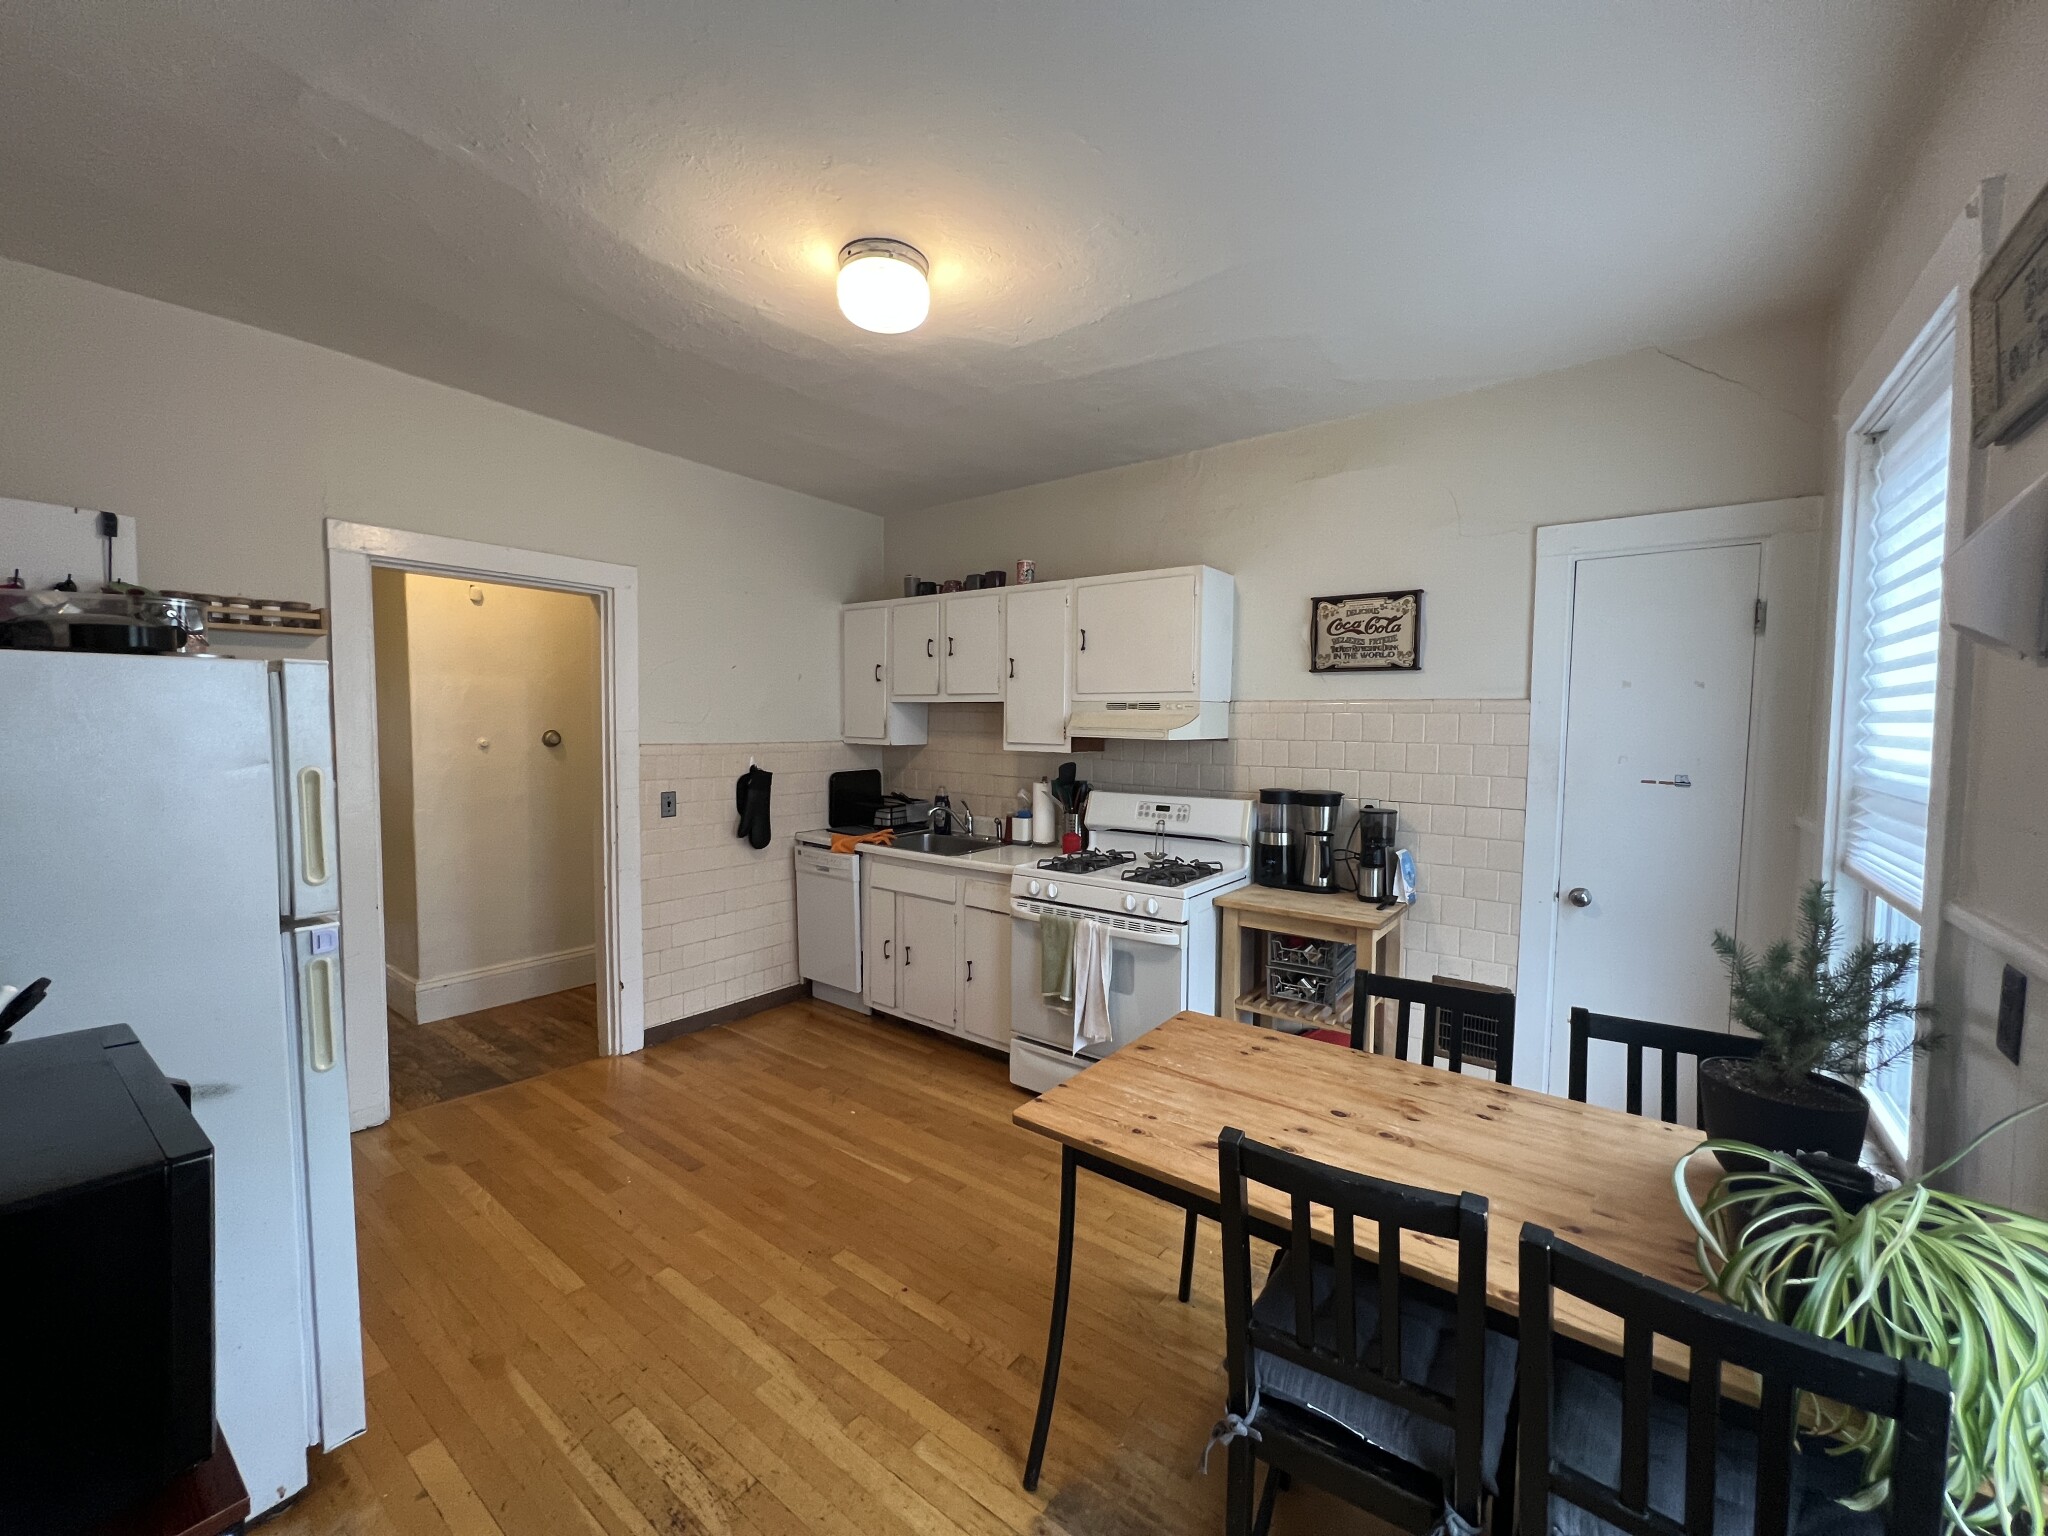 Photos of apartment on Ivaloo,Somerville MA 02143